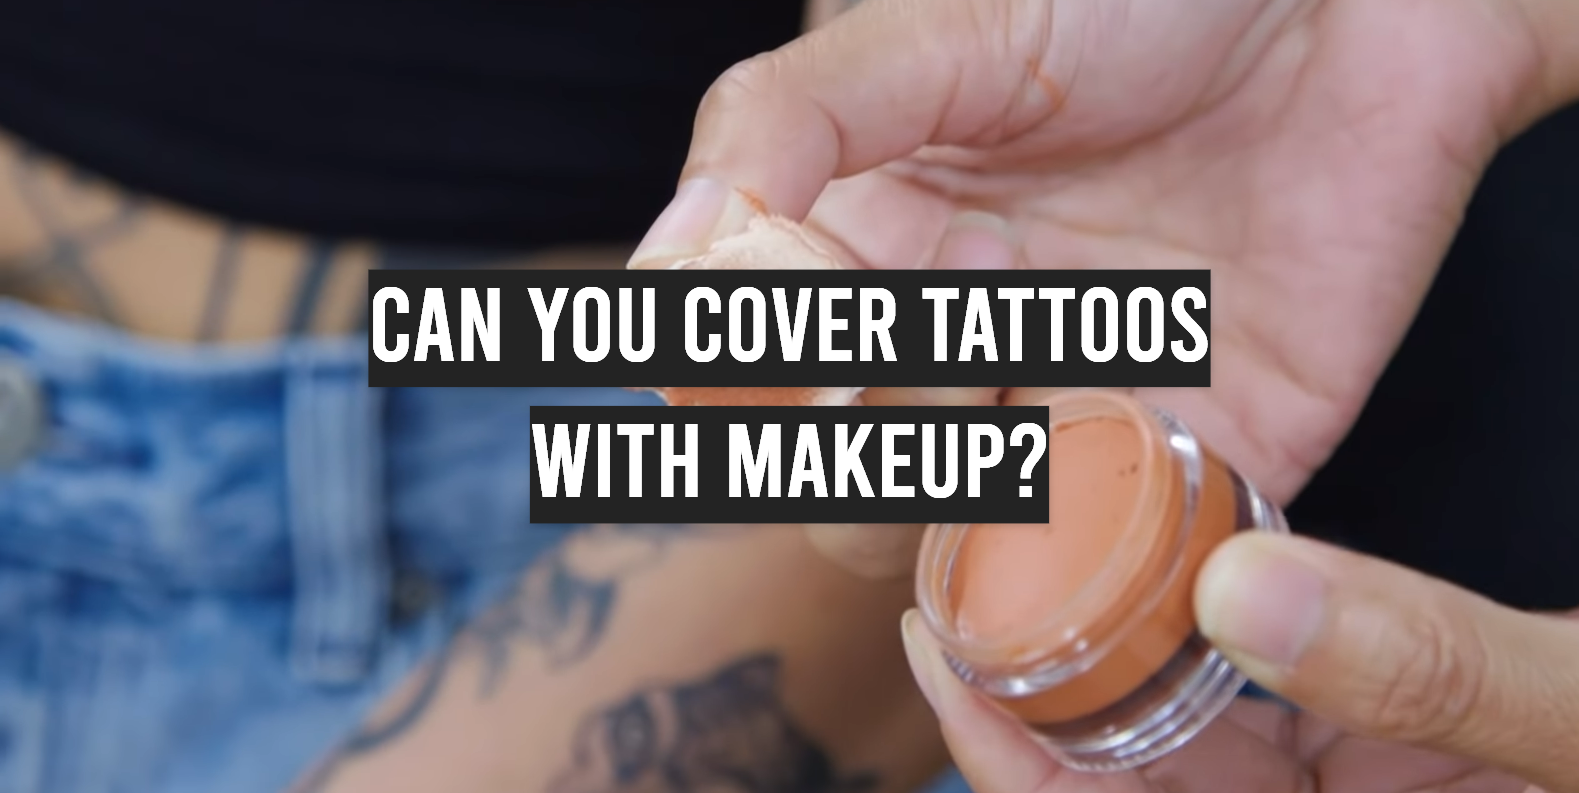 Can You Cover Tattoos With Makeup?